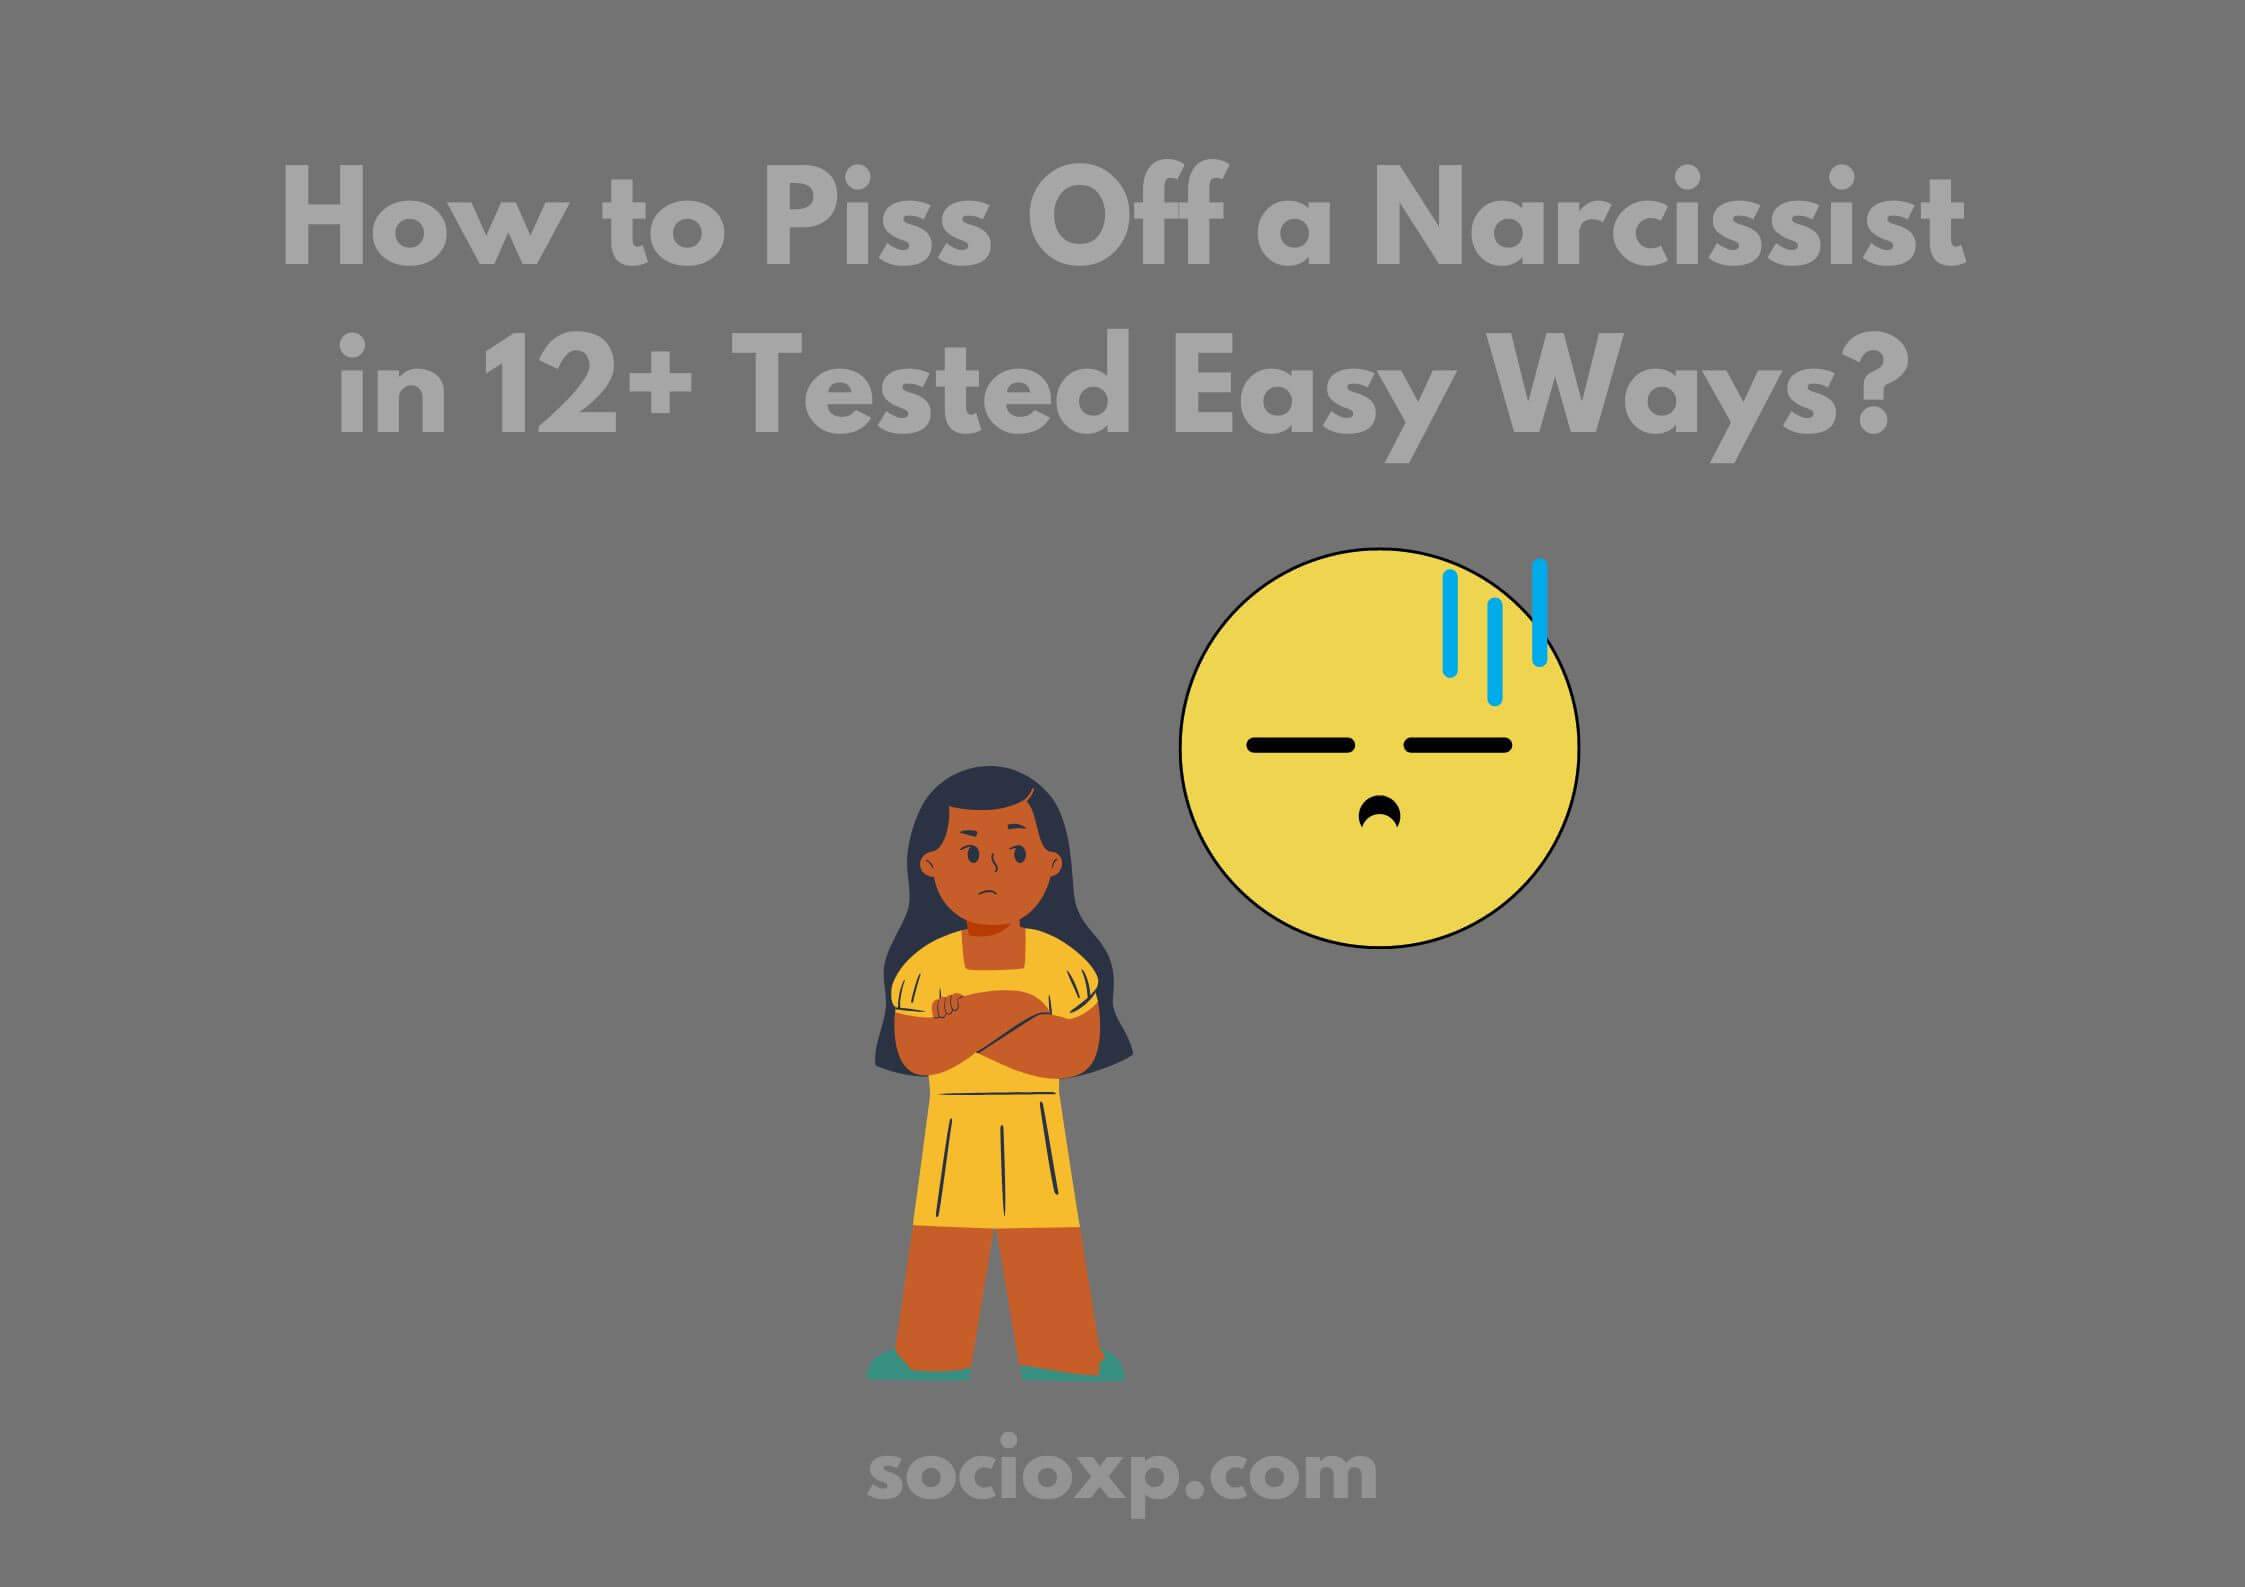 How to Piss Off a Narcissist in 12+ Tested & Easy Ways?